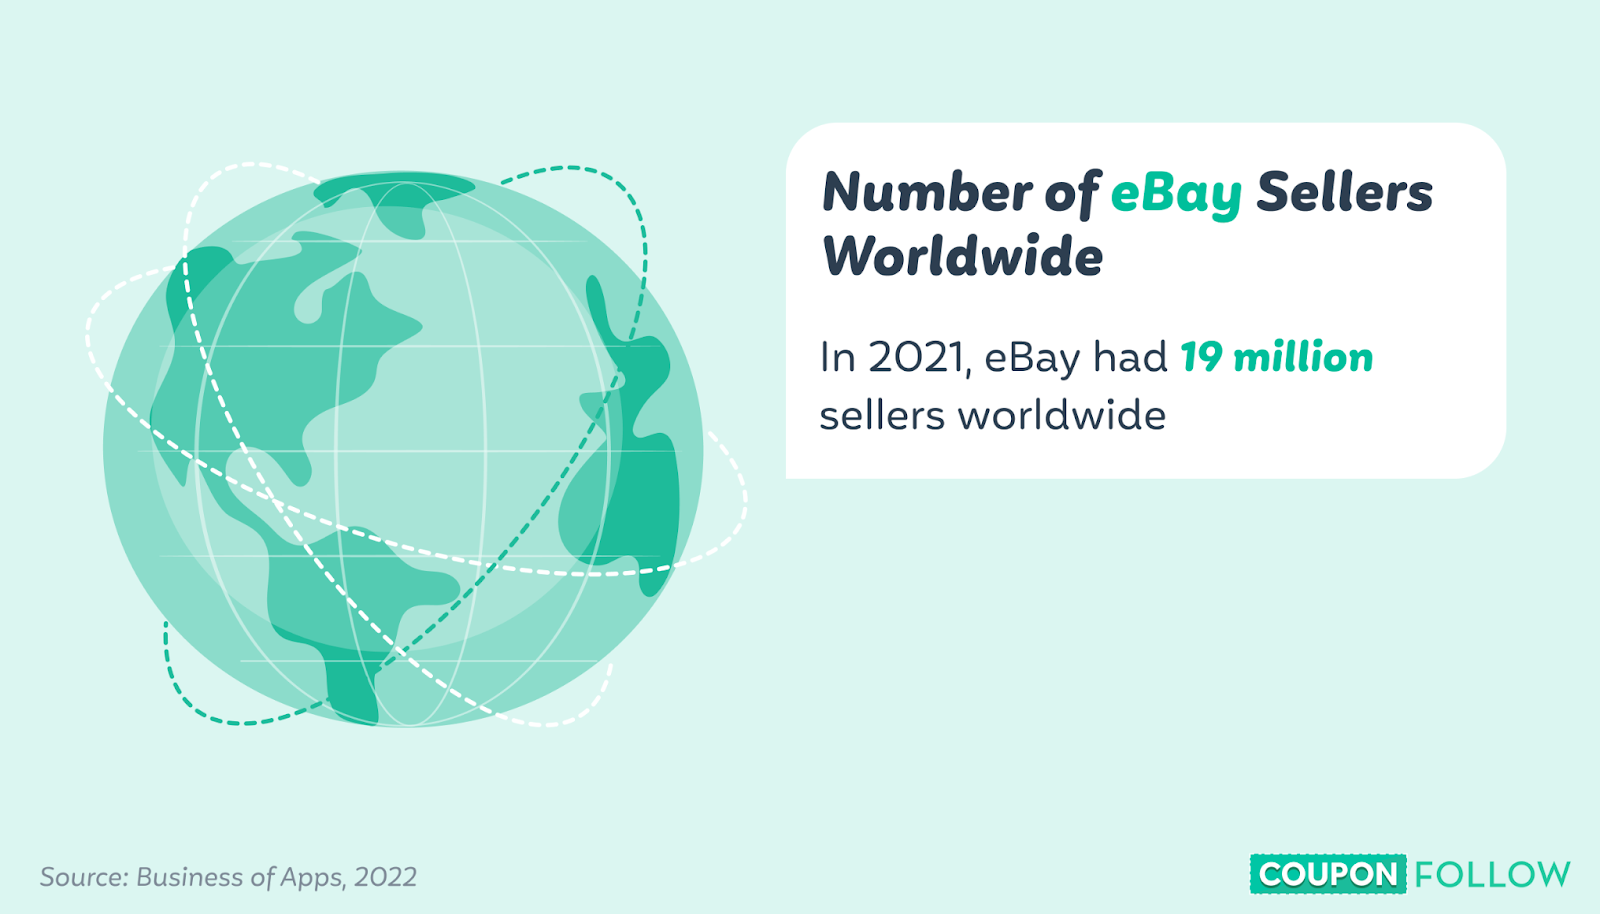 image showing the number of global eBay sellers